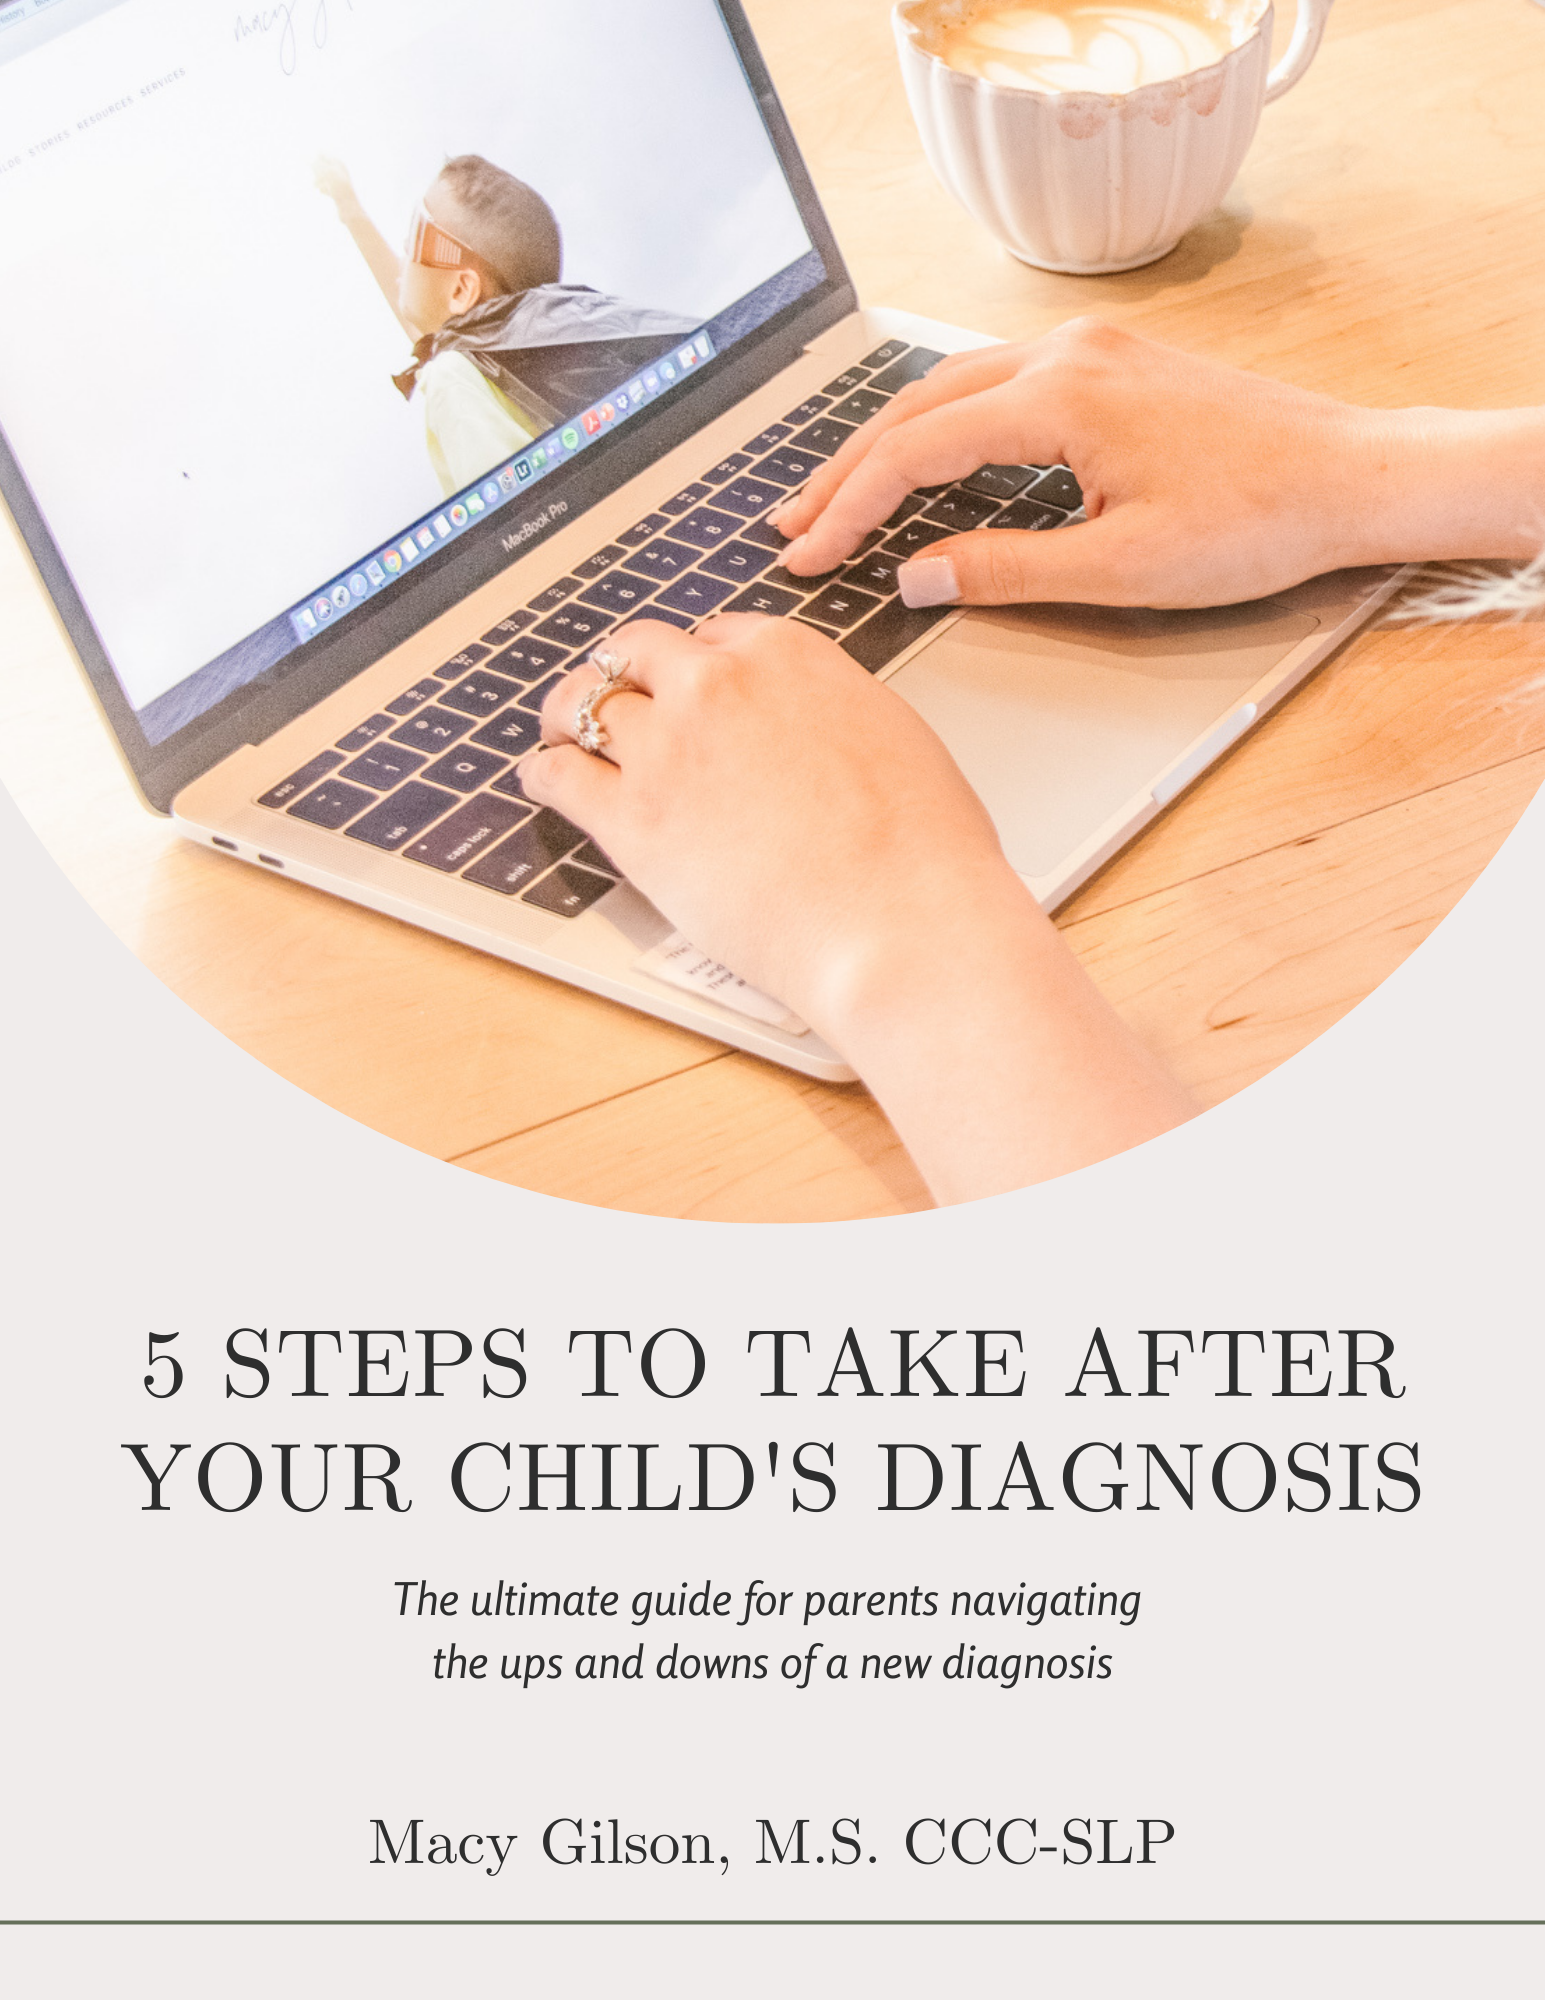 5 Steps to Take After Your Child's Diagnosis